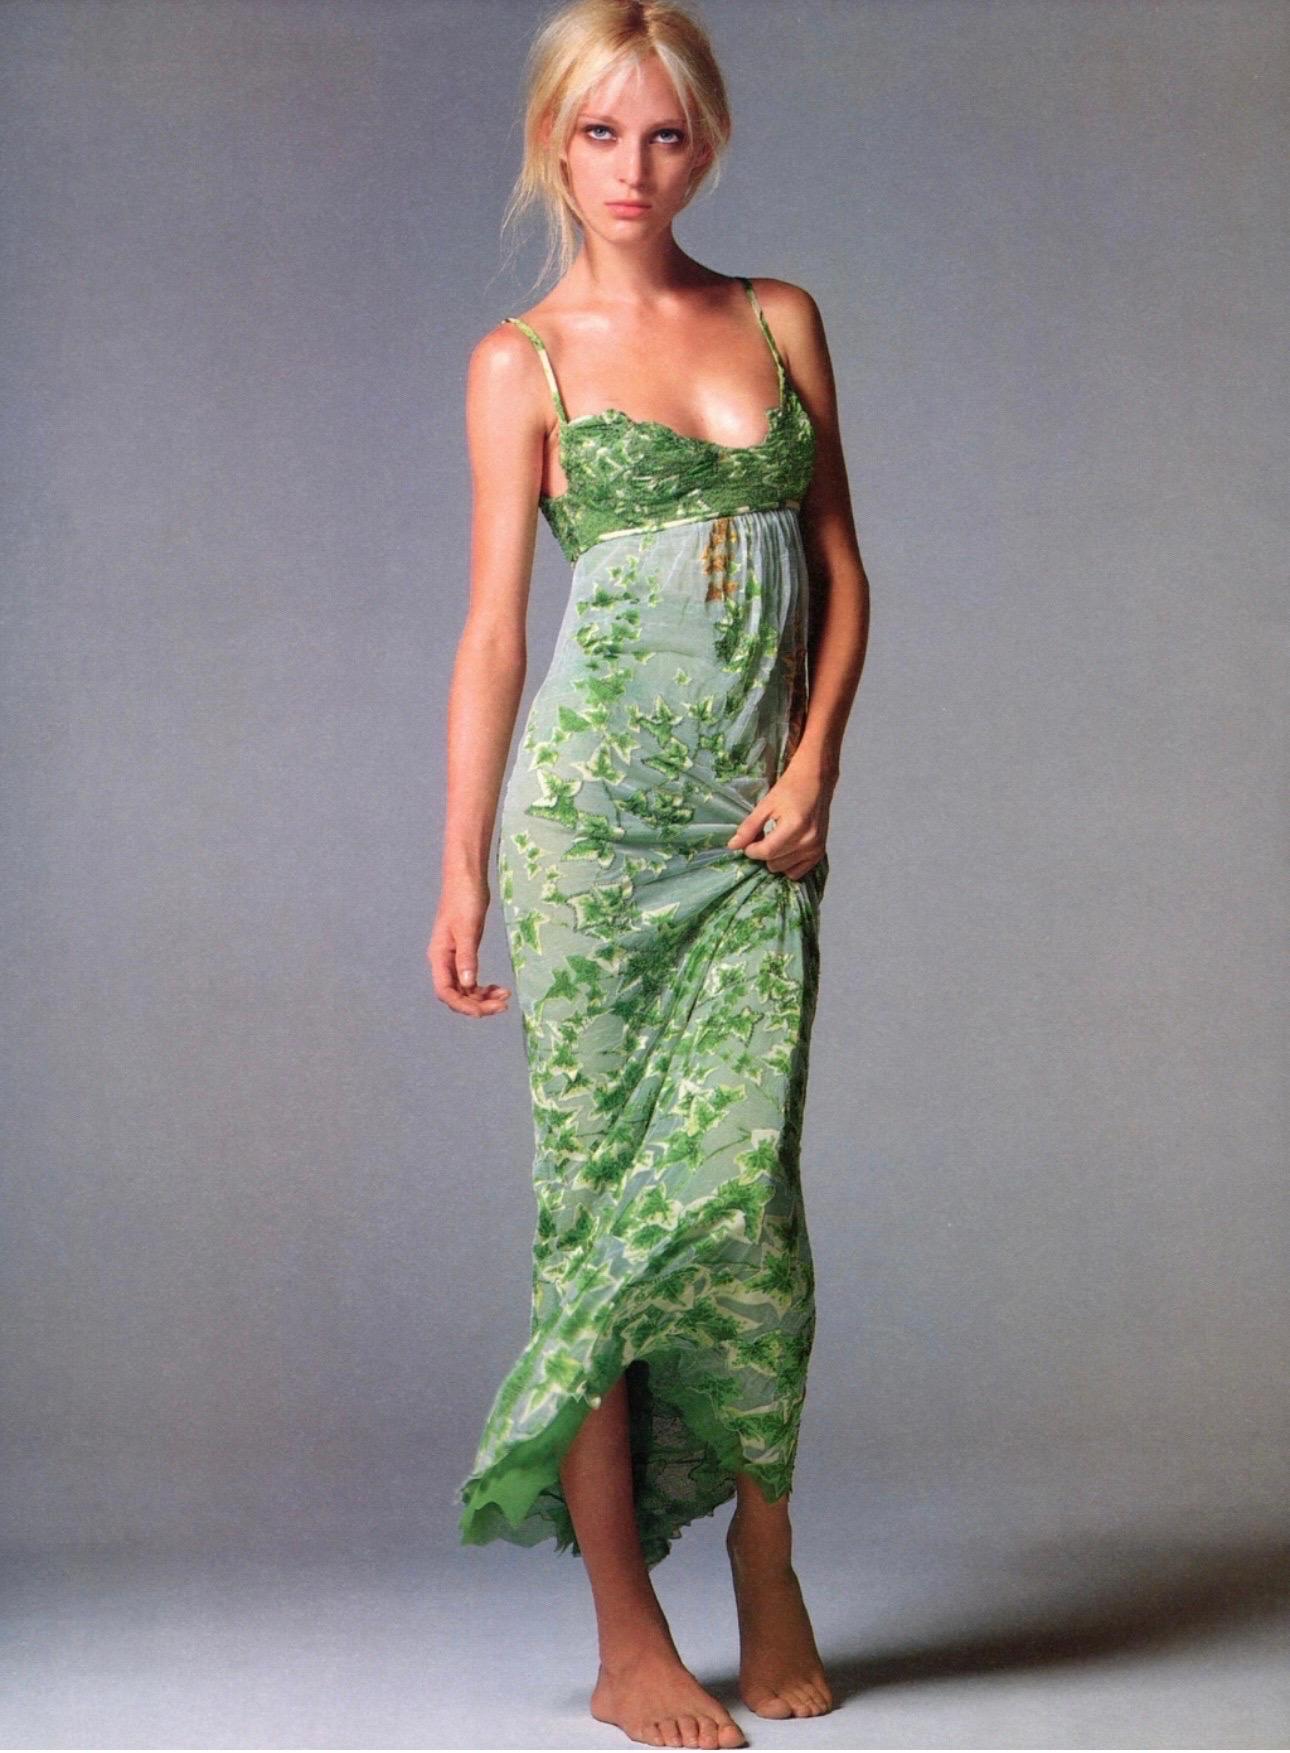 Gianni Versace S/S 1997 Runway Embellished Sheer Lace Shawl Evening Dress Gown  For Sale 5